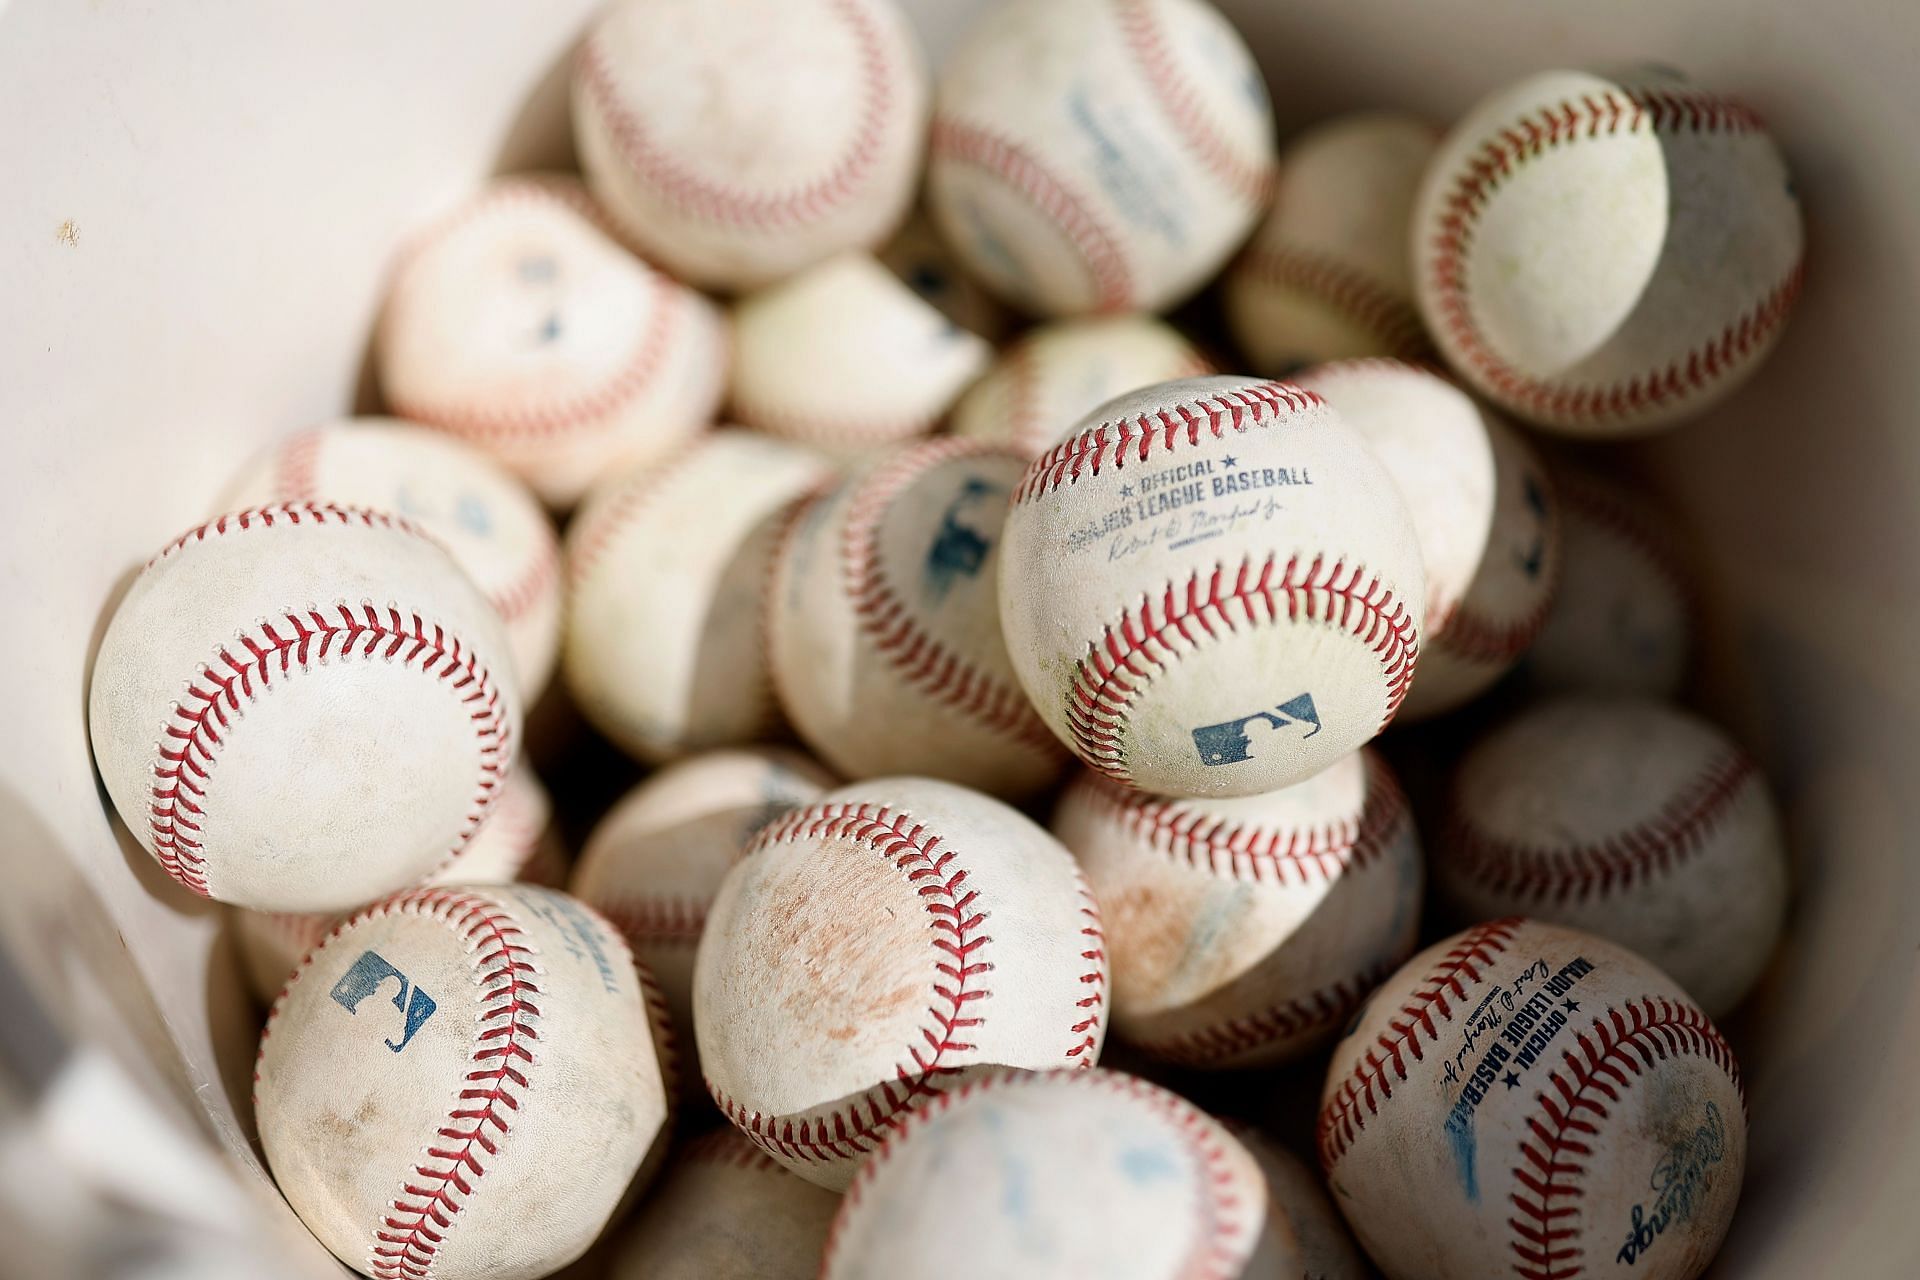 Many analysts have speculated that altered MLB 2021 baseballs have decreased offense this season.